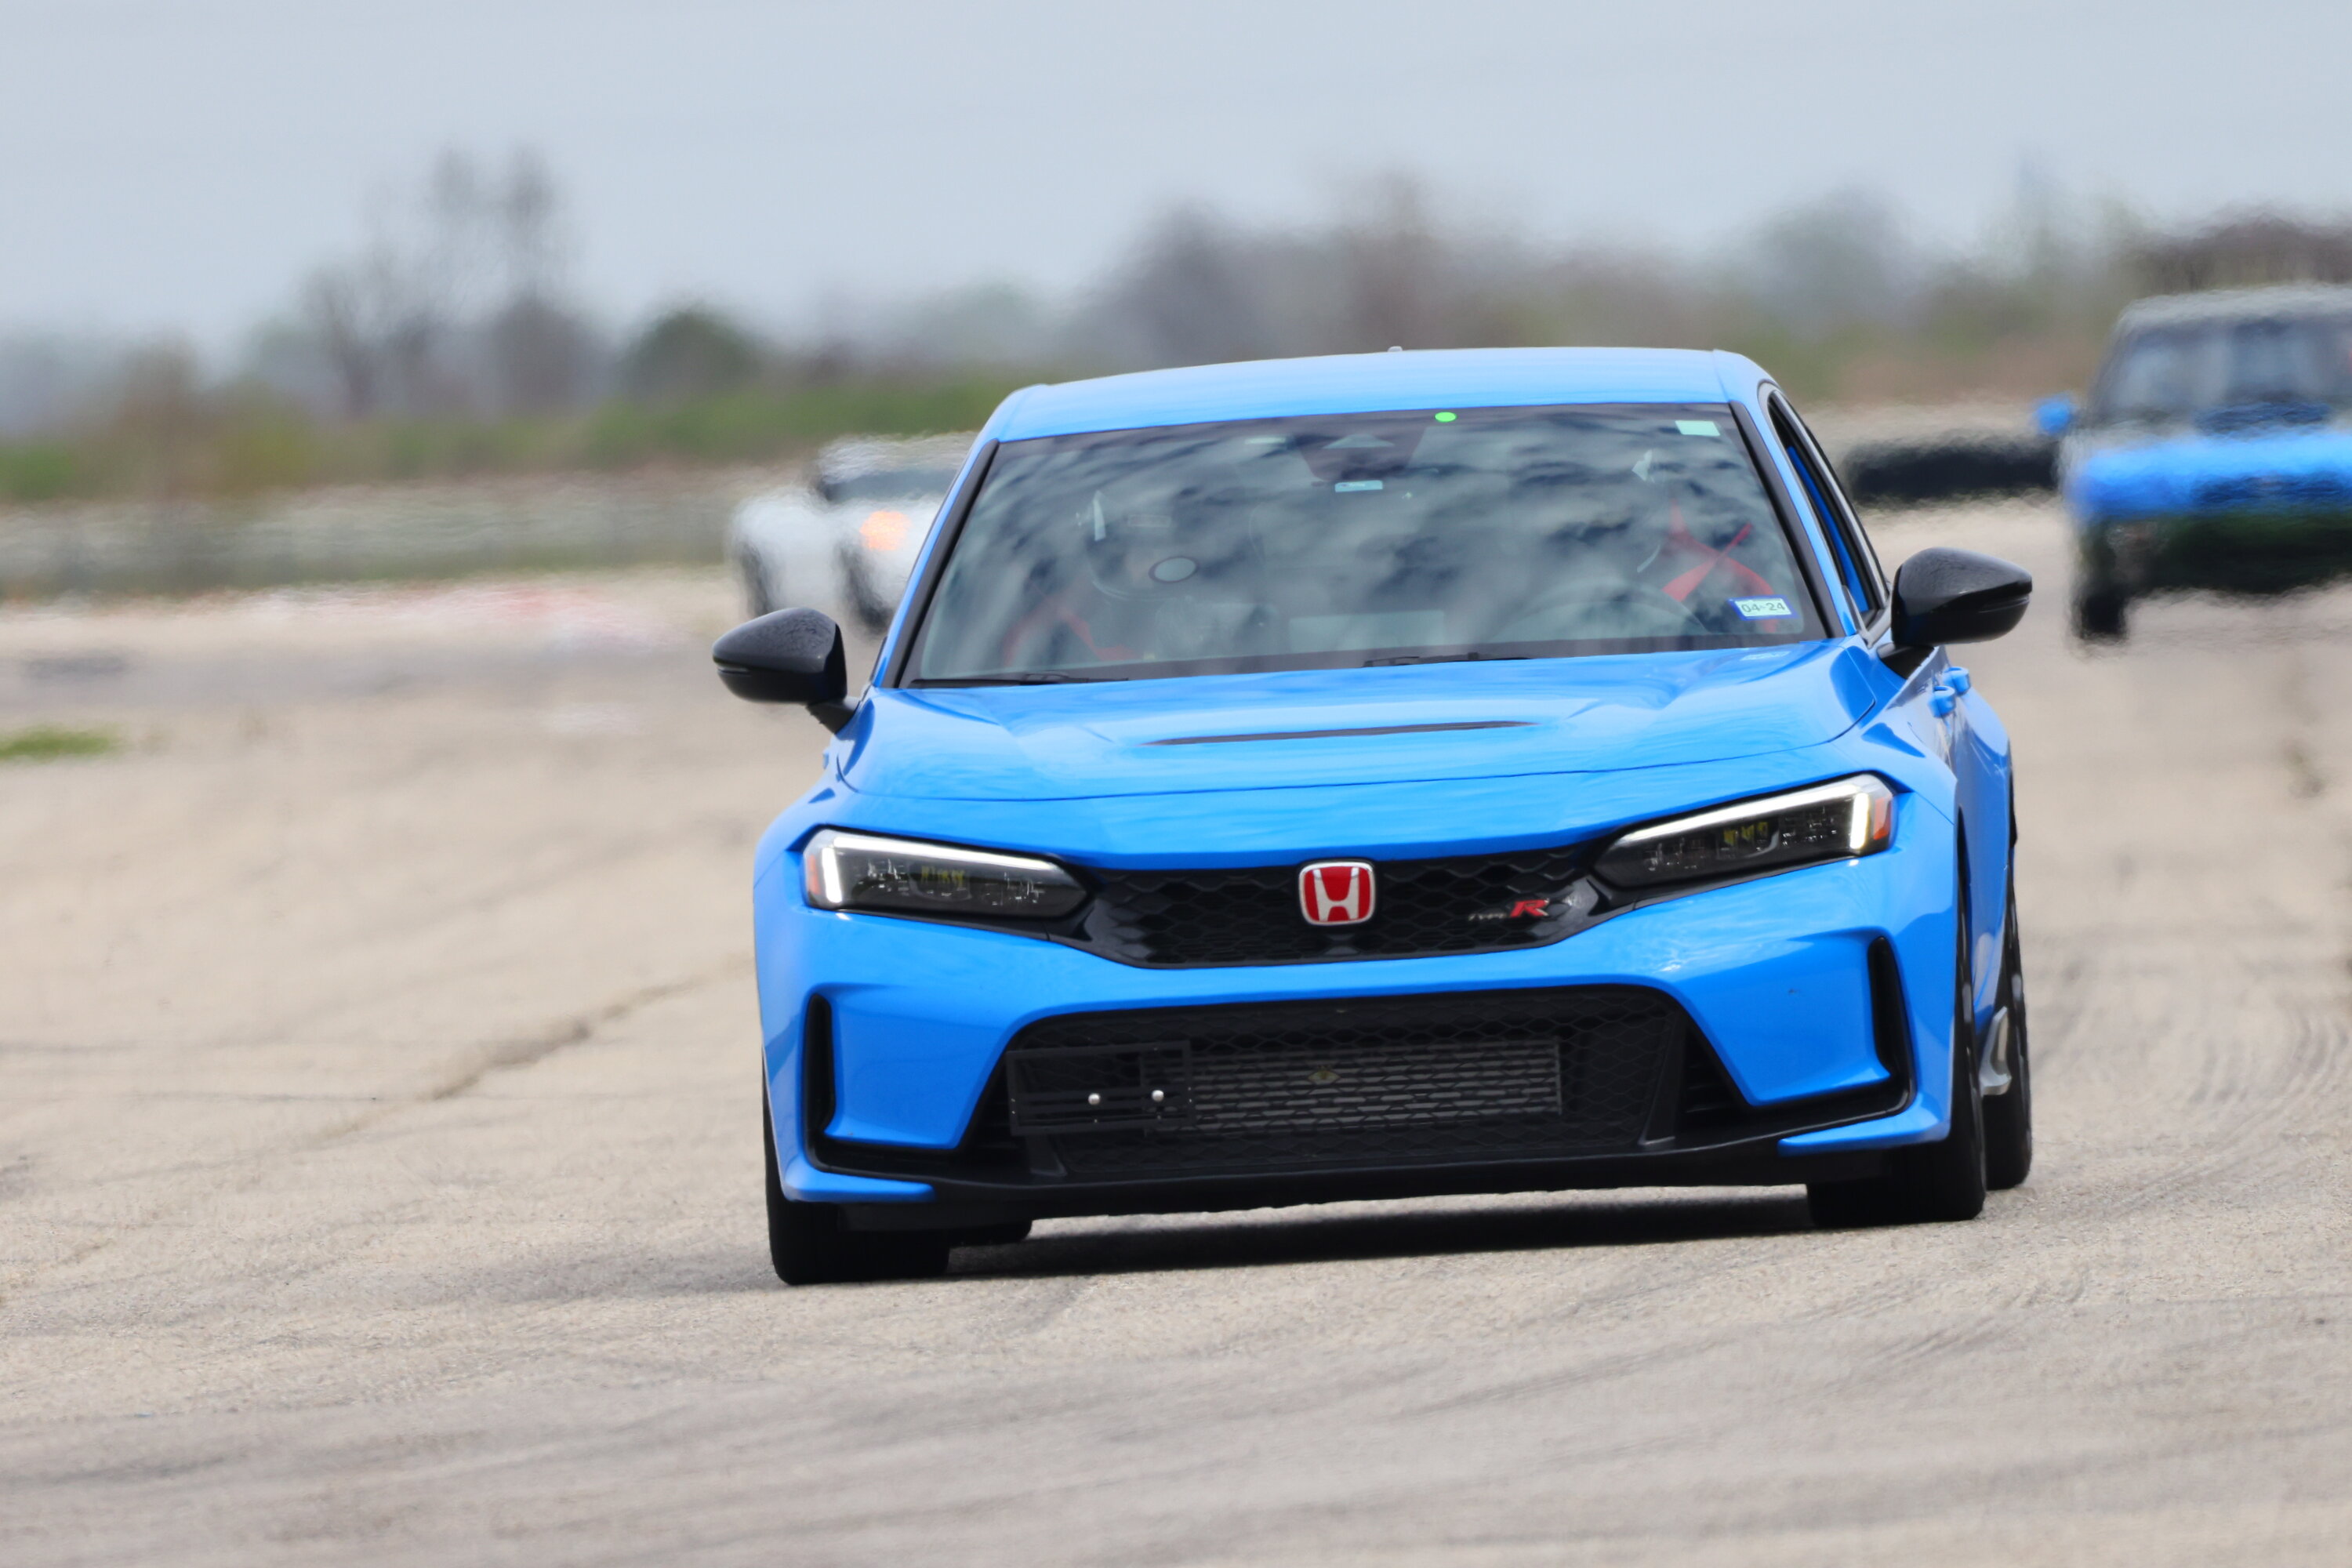 11th Gen Honda Civic [MSR Houston] First Track Day impressions from a novice driver IMG_11176.JPG